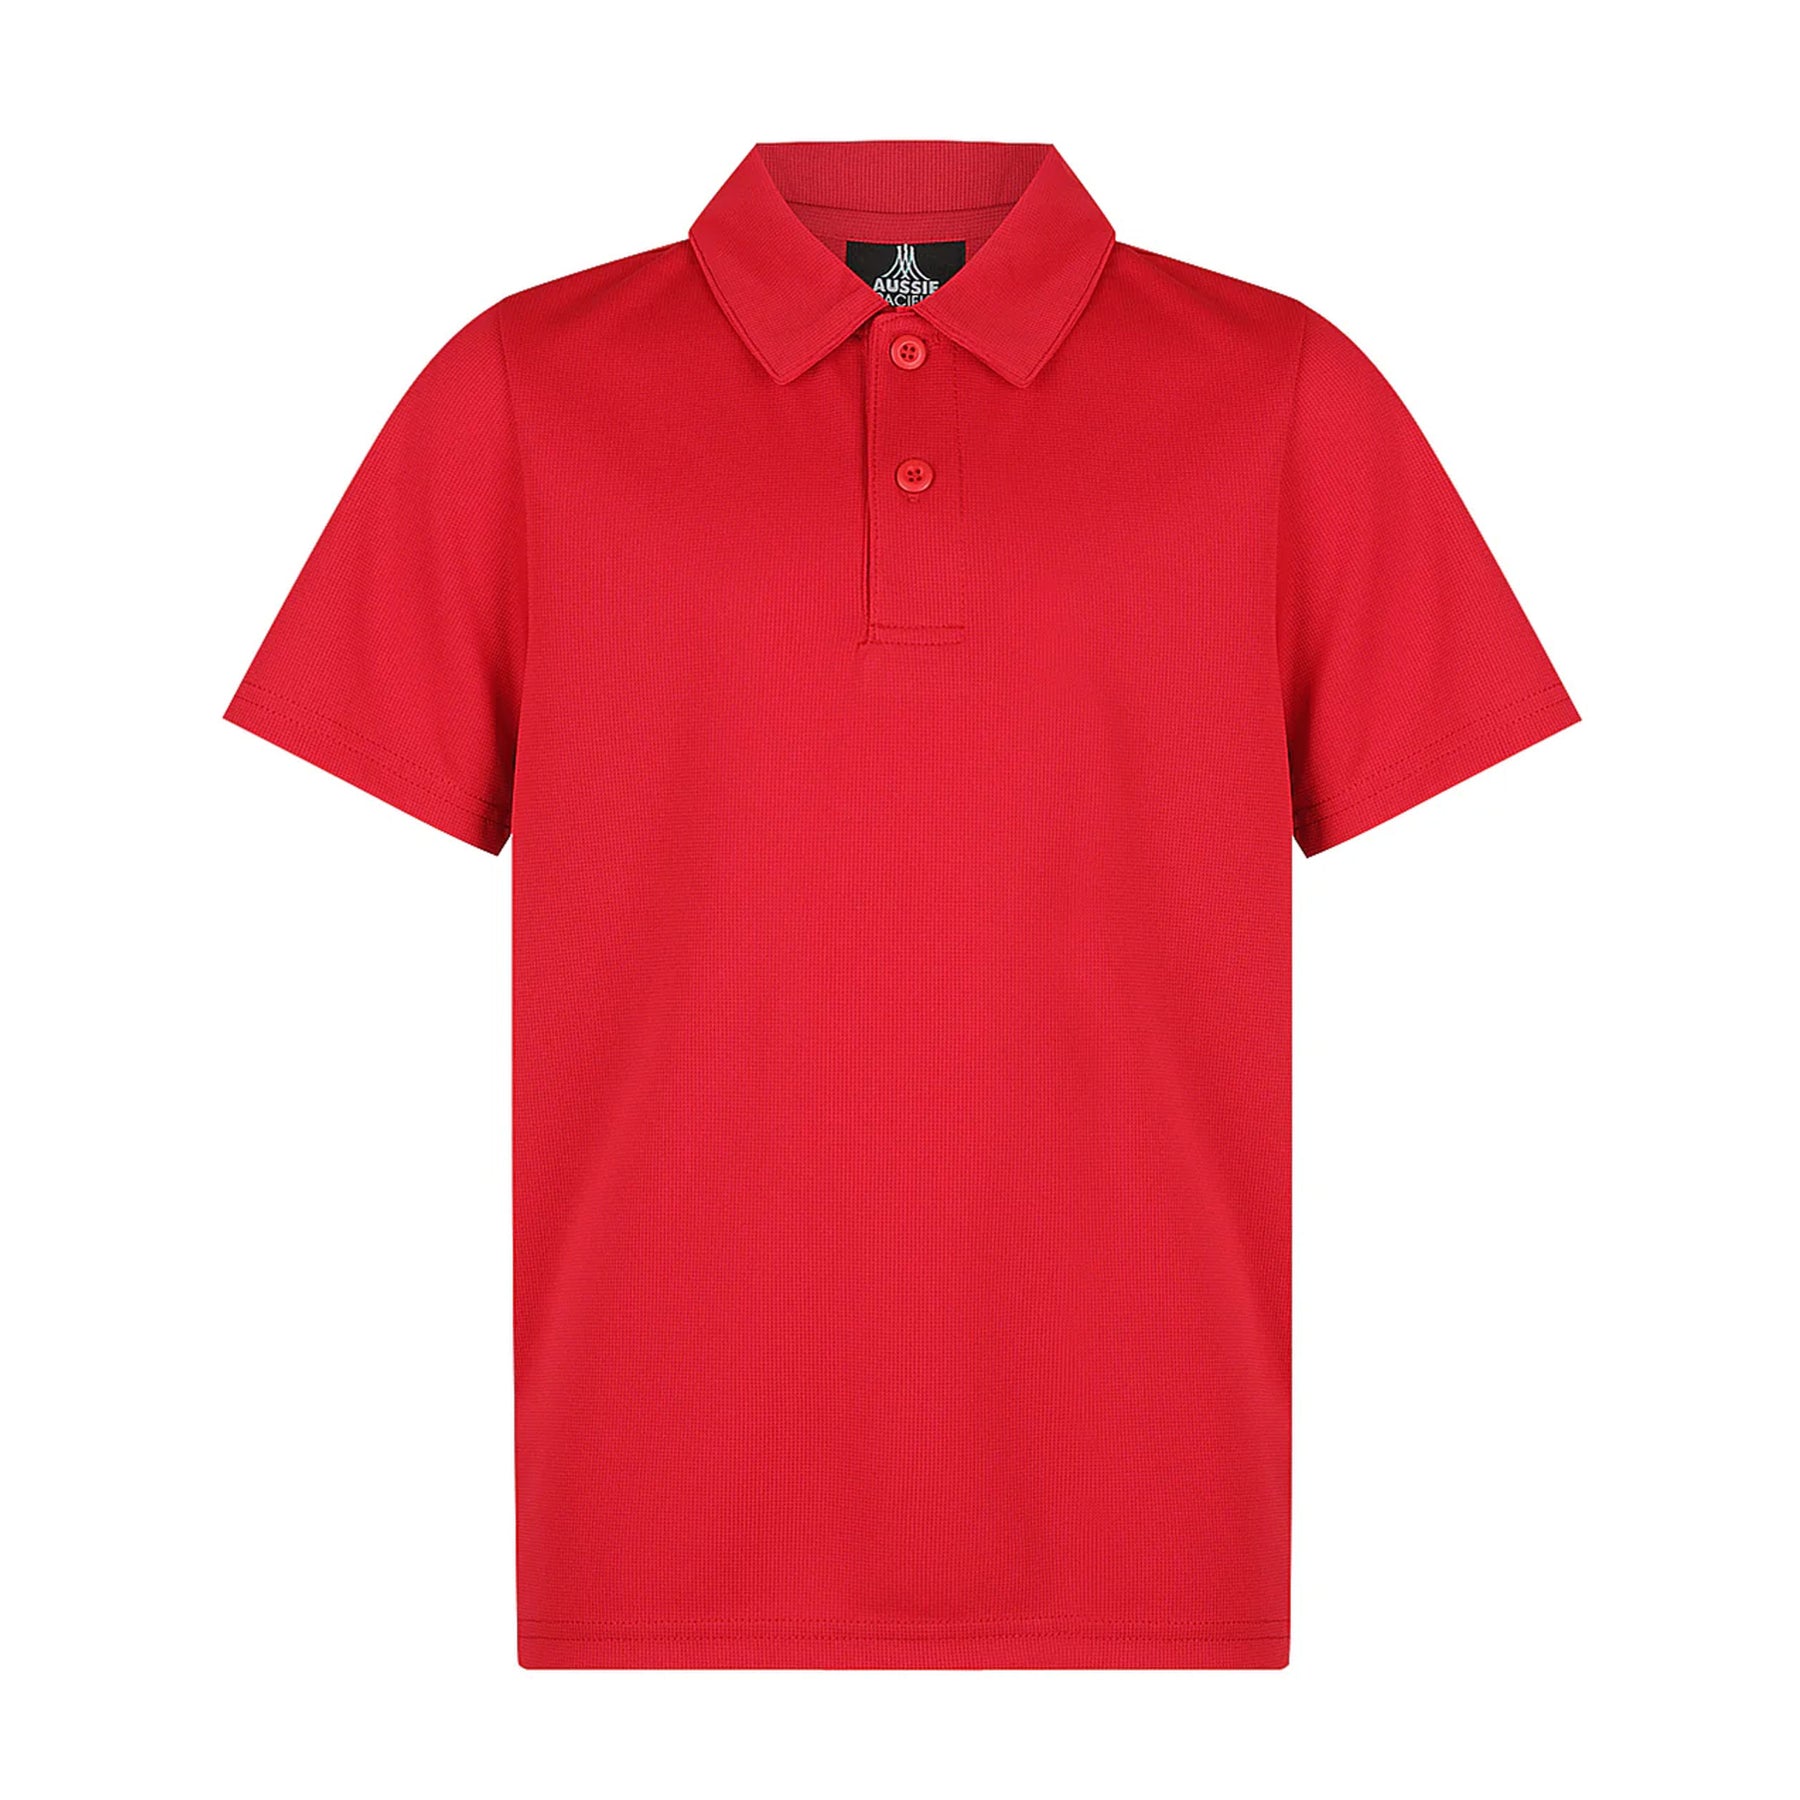 aussie pacific botany kids polos in red